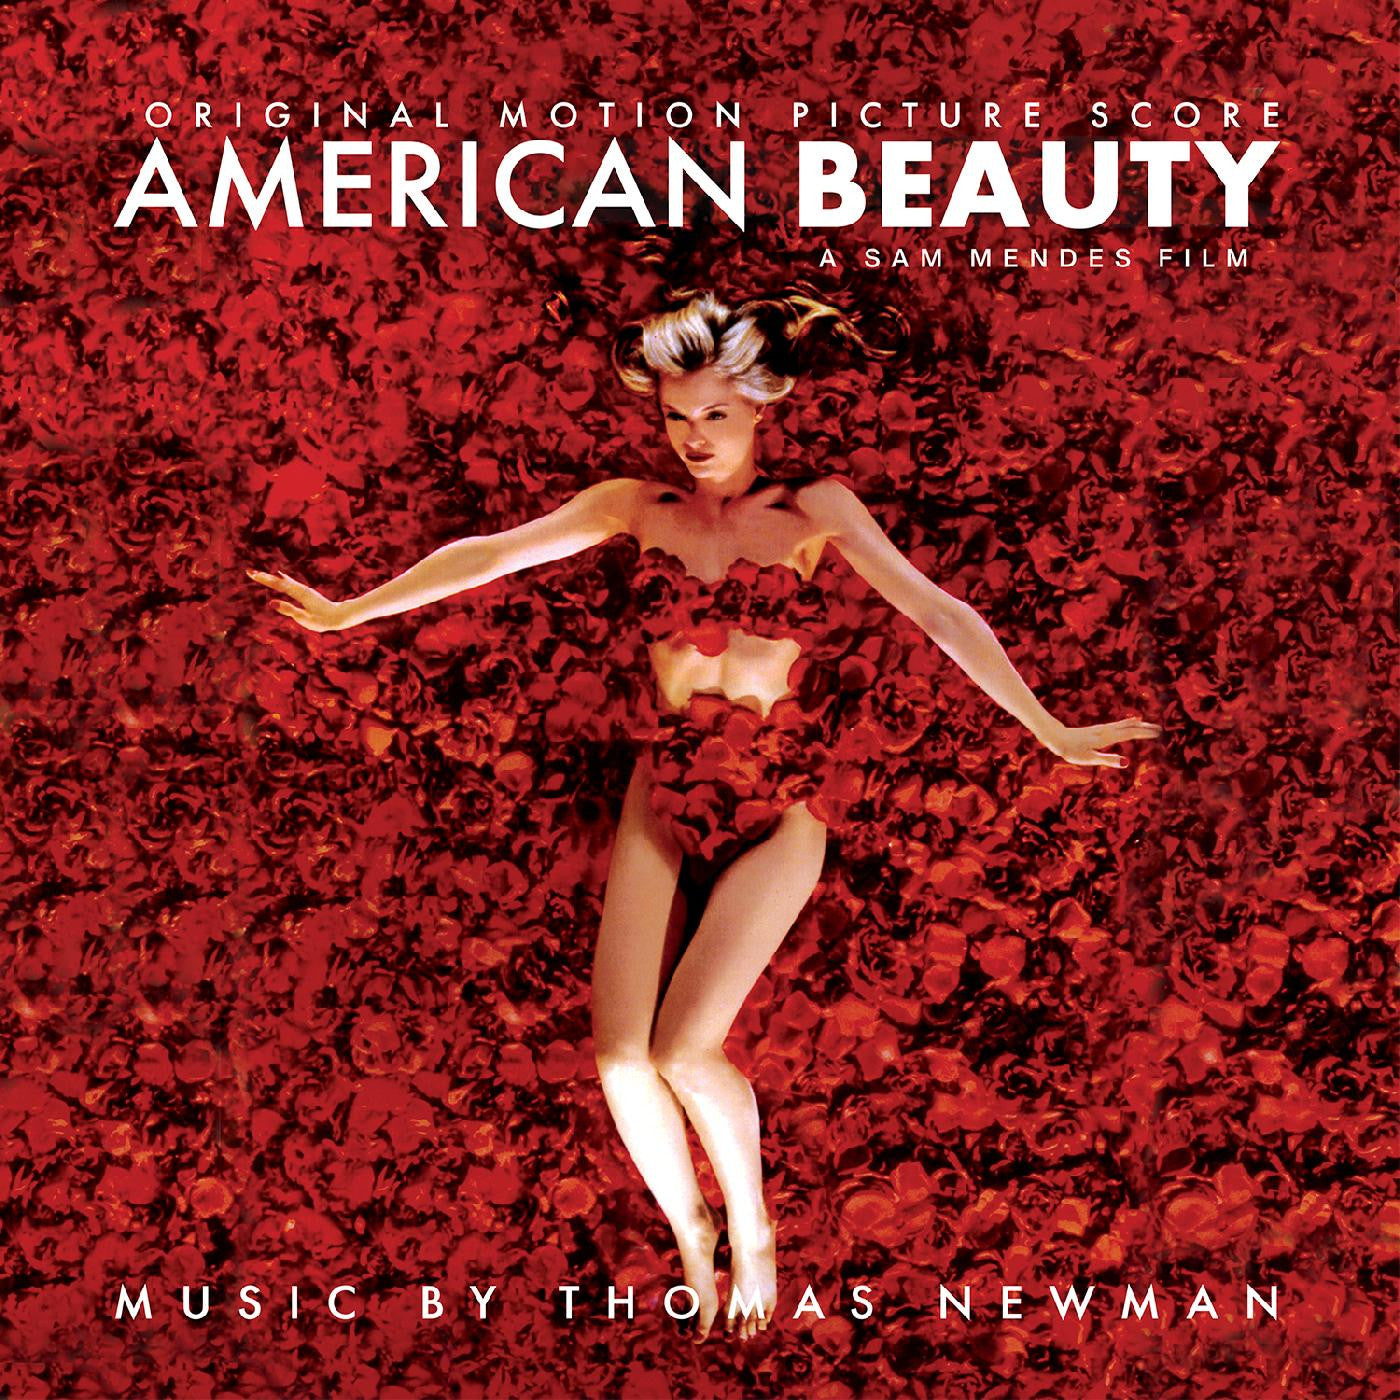 Order Thomas Newman - American Beauty: Original Motion Picture Score (Blood Red Rose Vinyl)